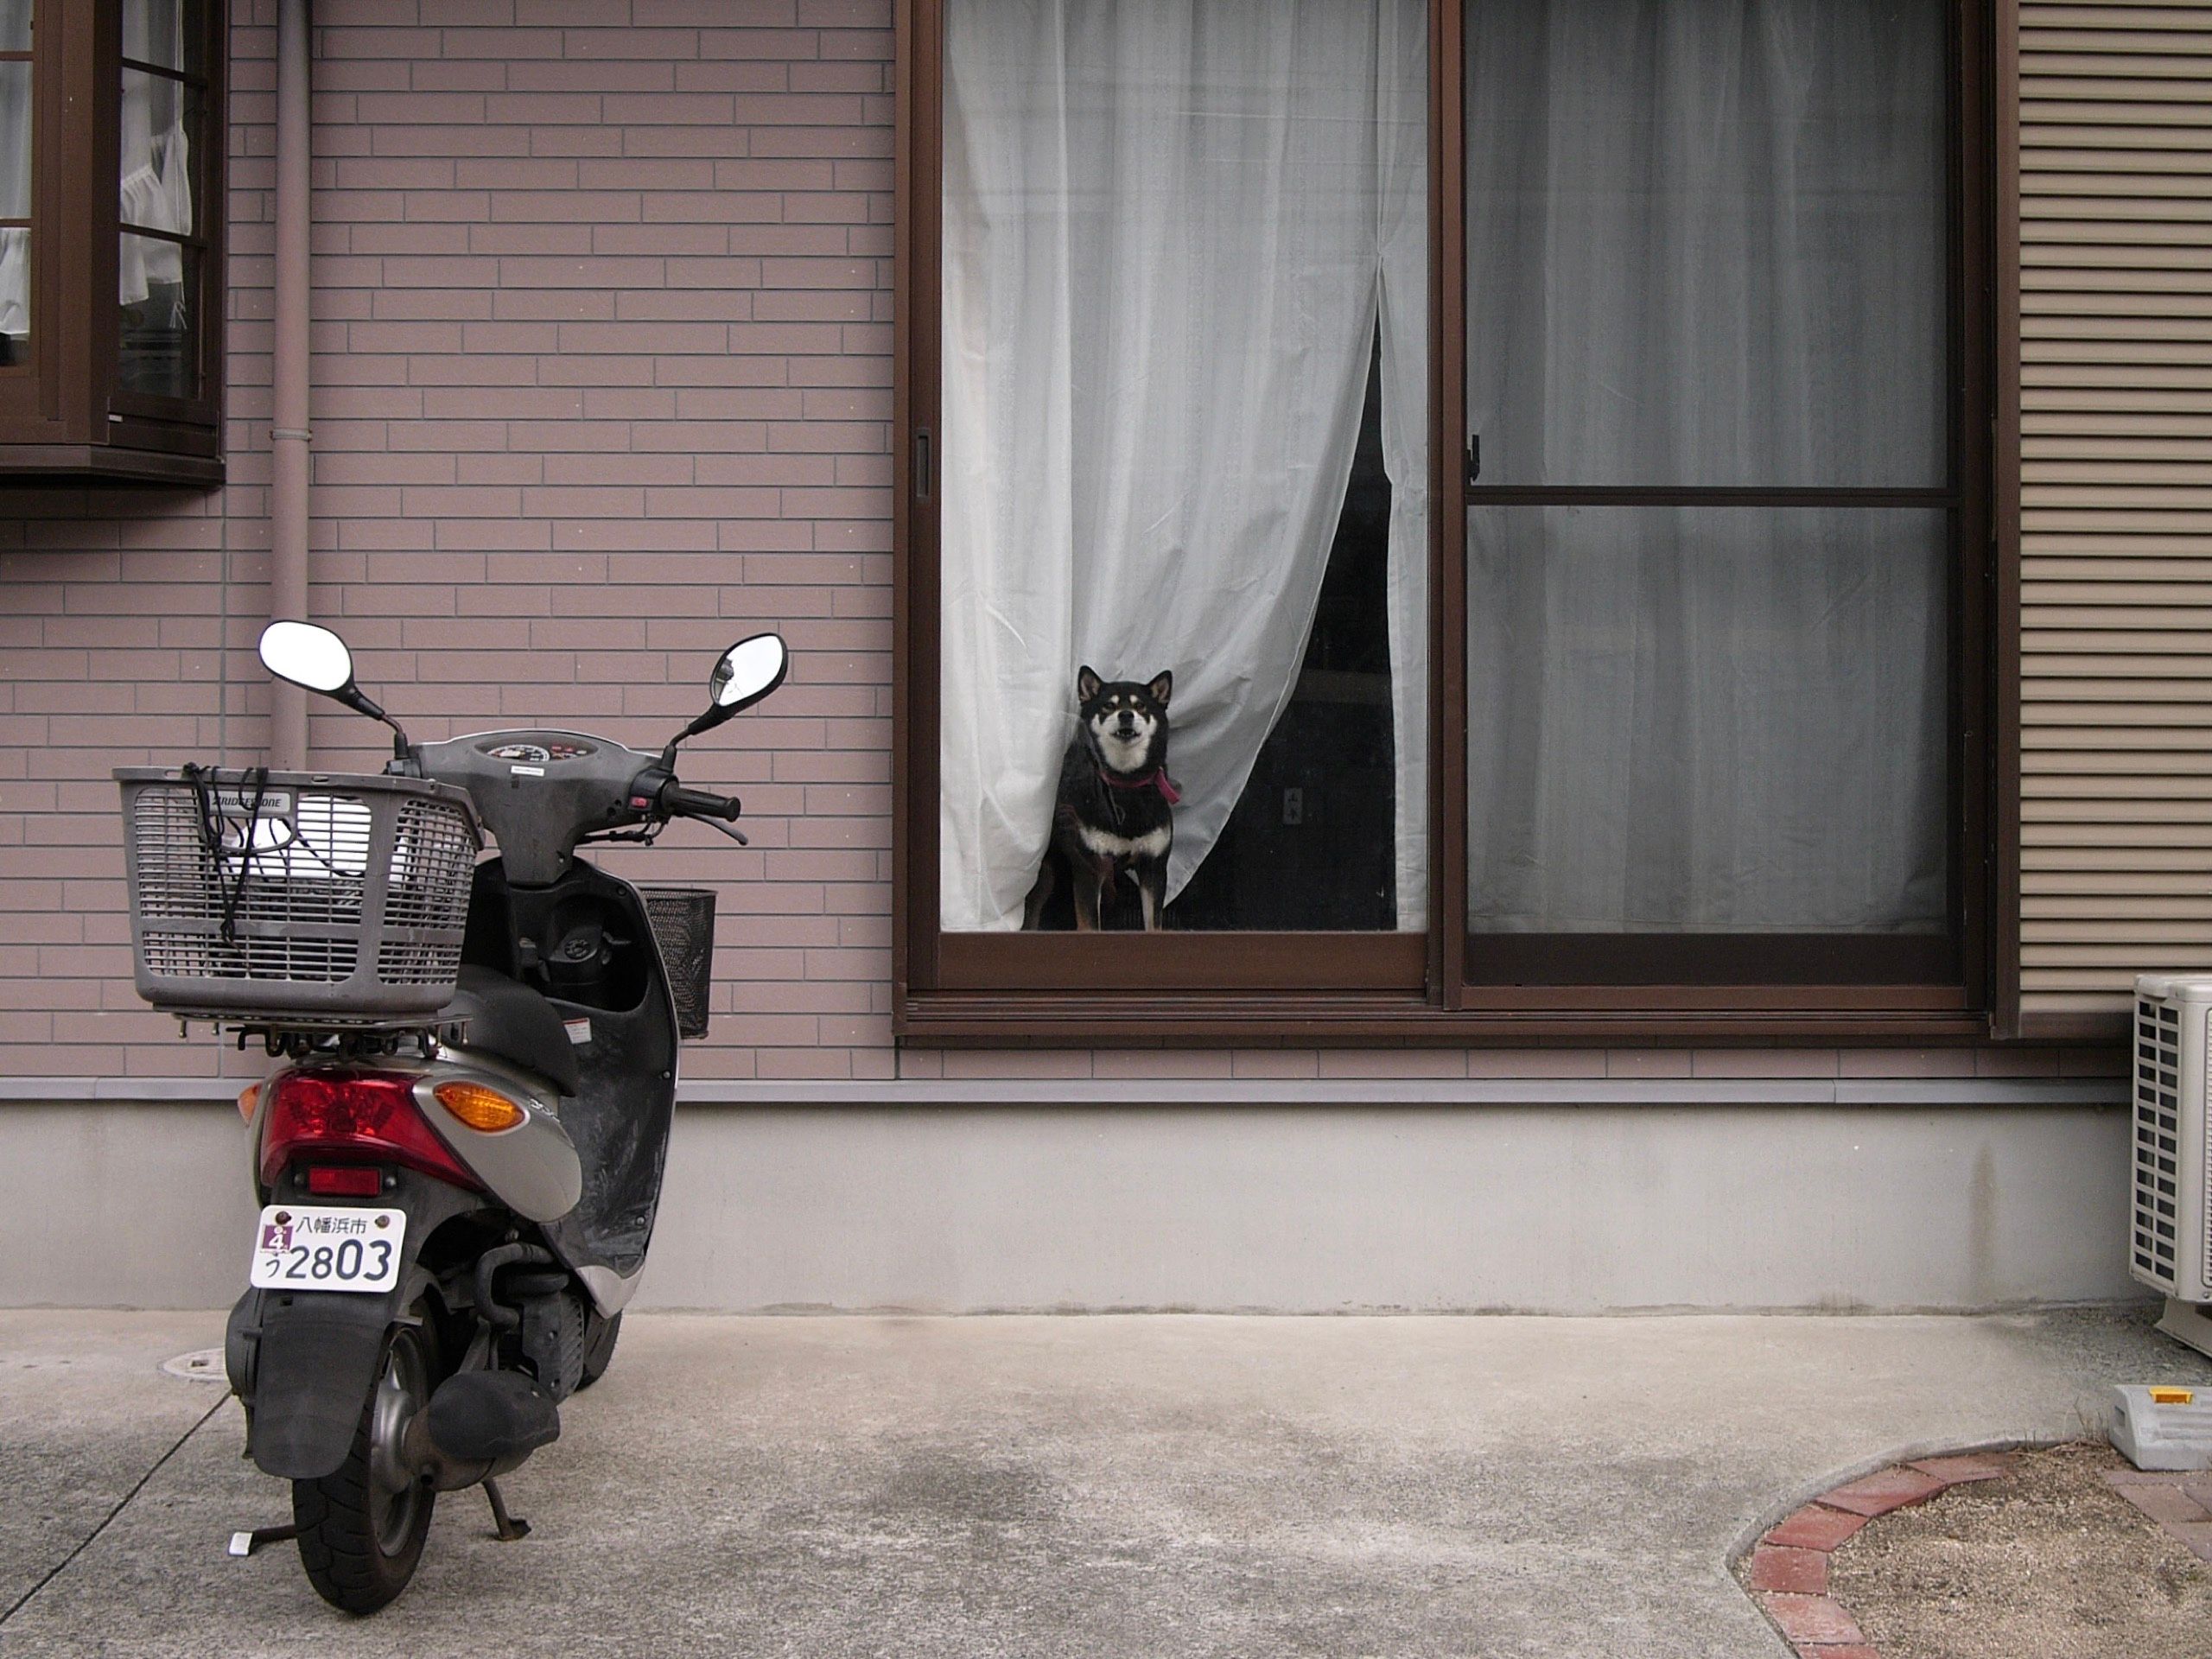 A dog stands in a window with a scooter parked outside.